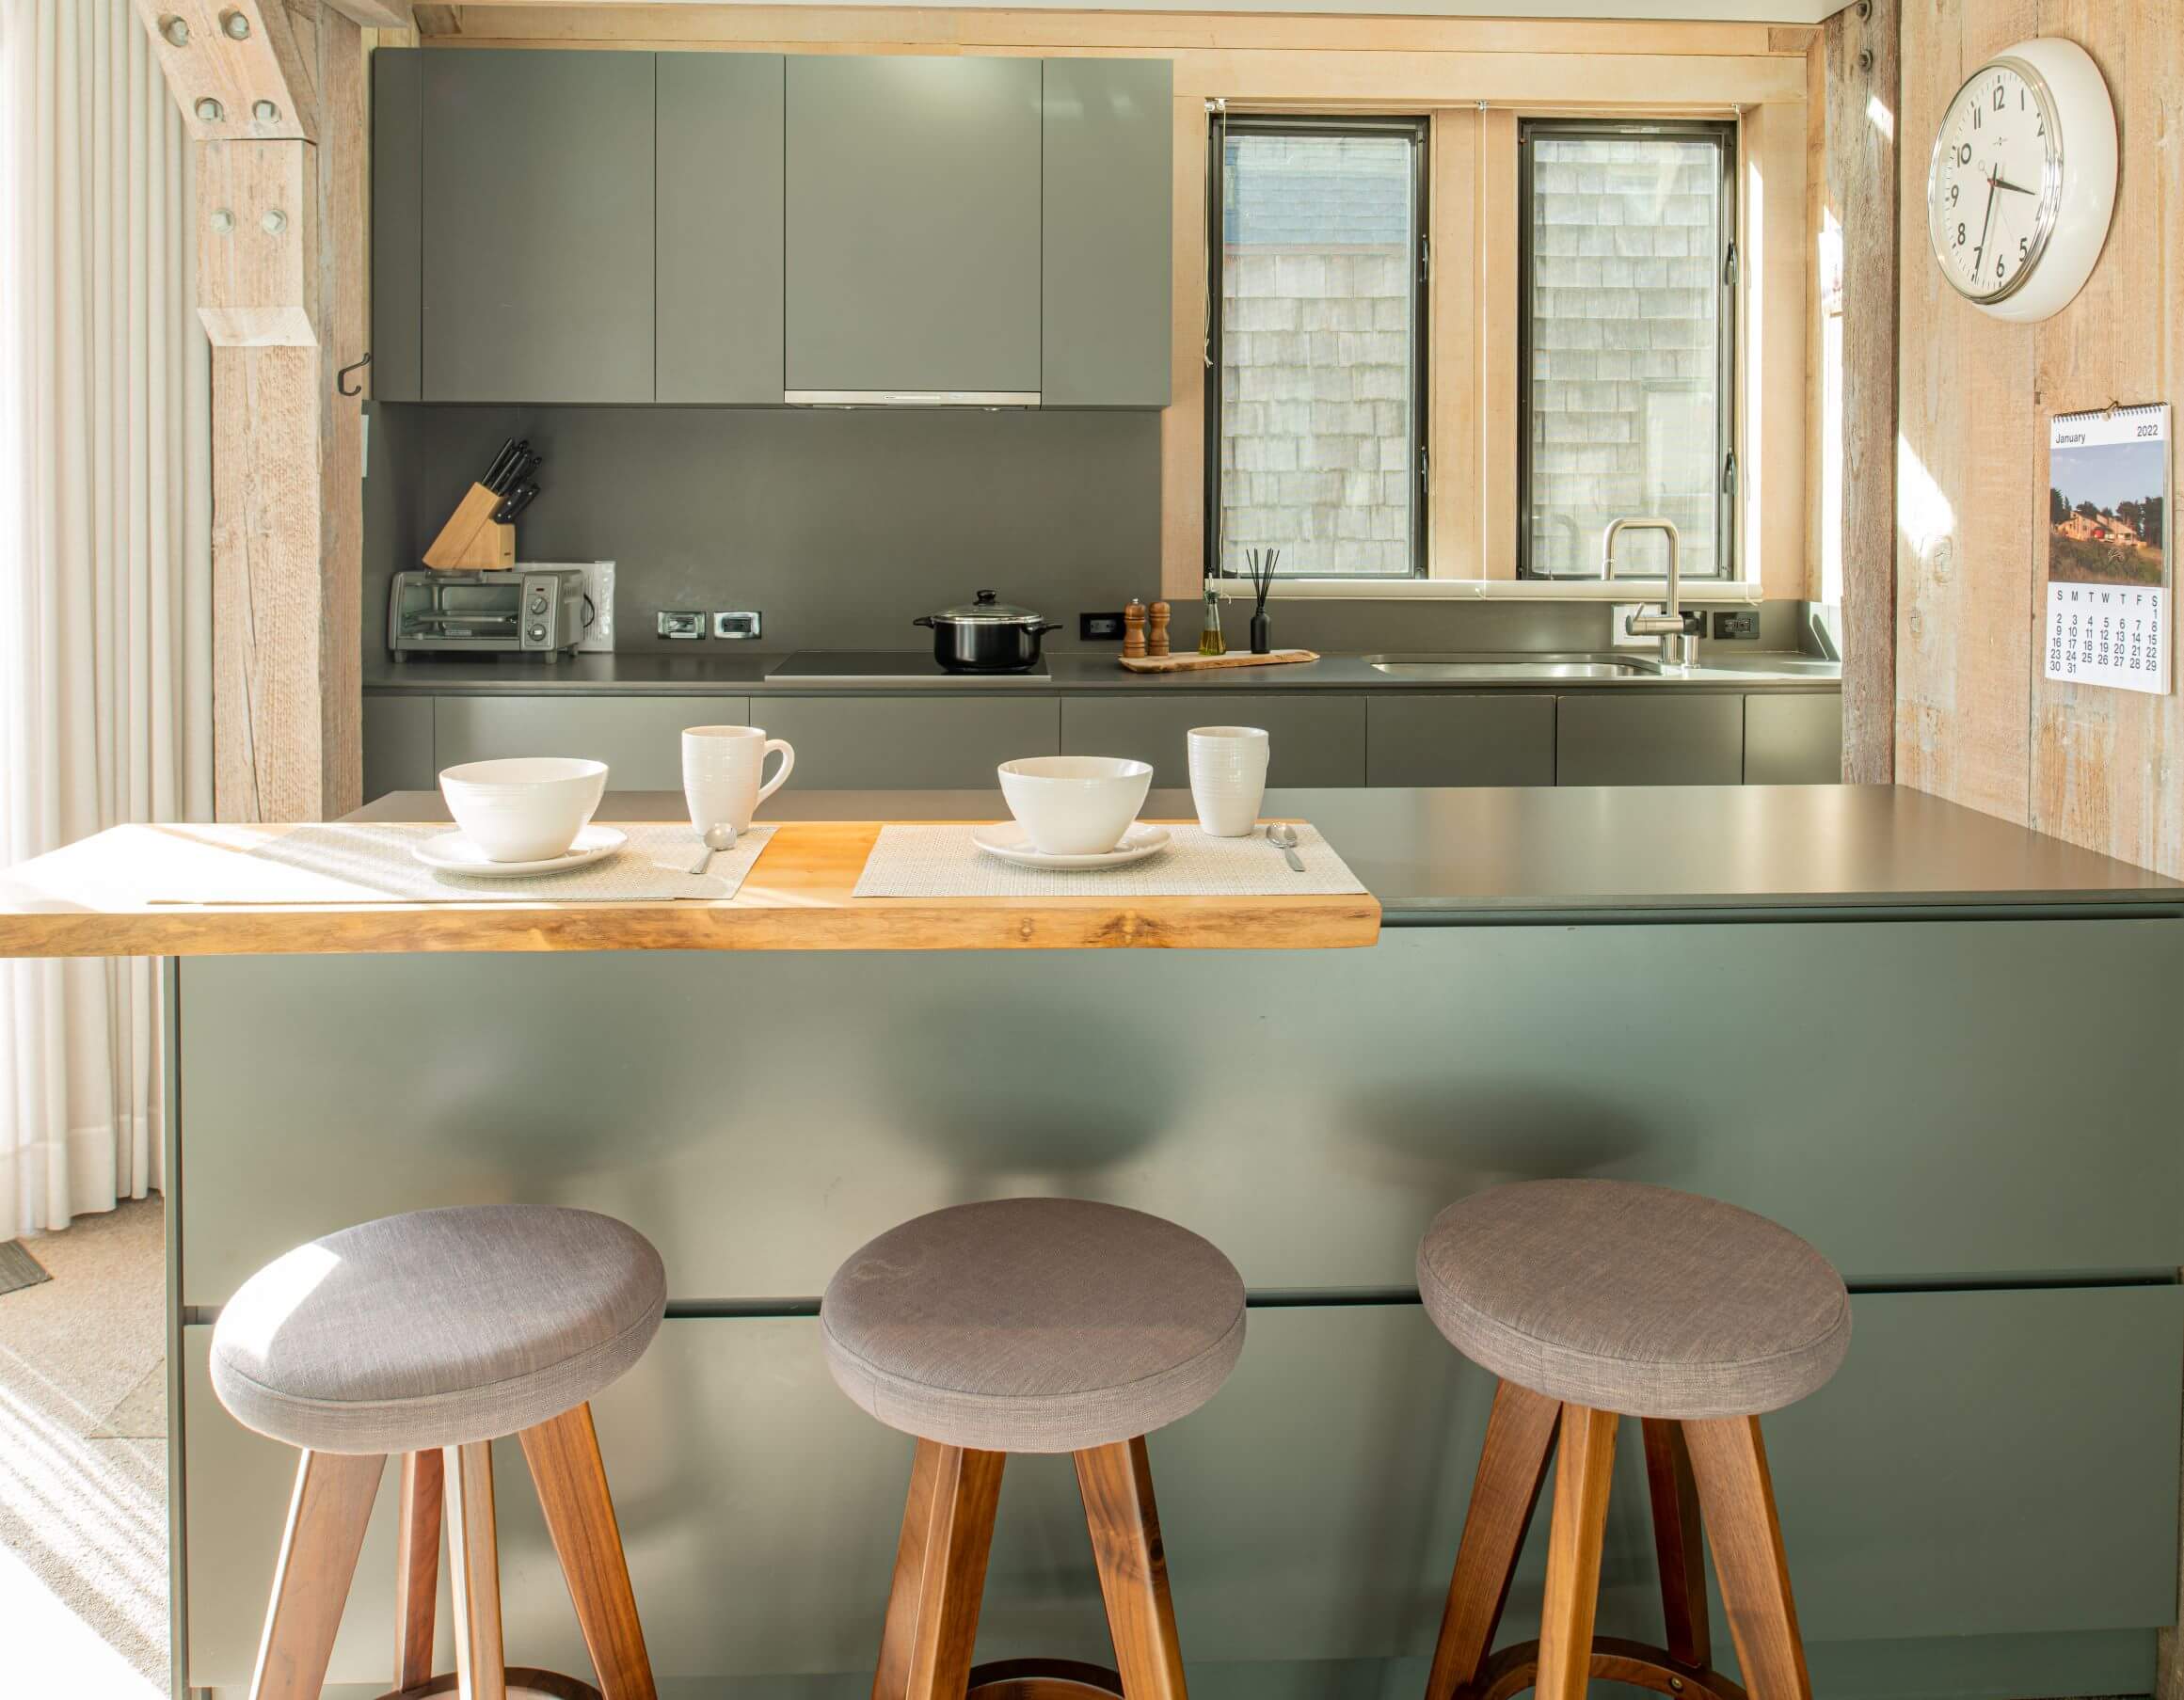 Seaview: bright kitchen breakfast bar with high stools looking into kitchen.